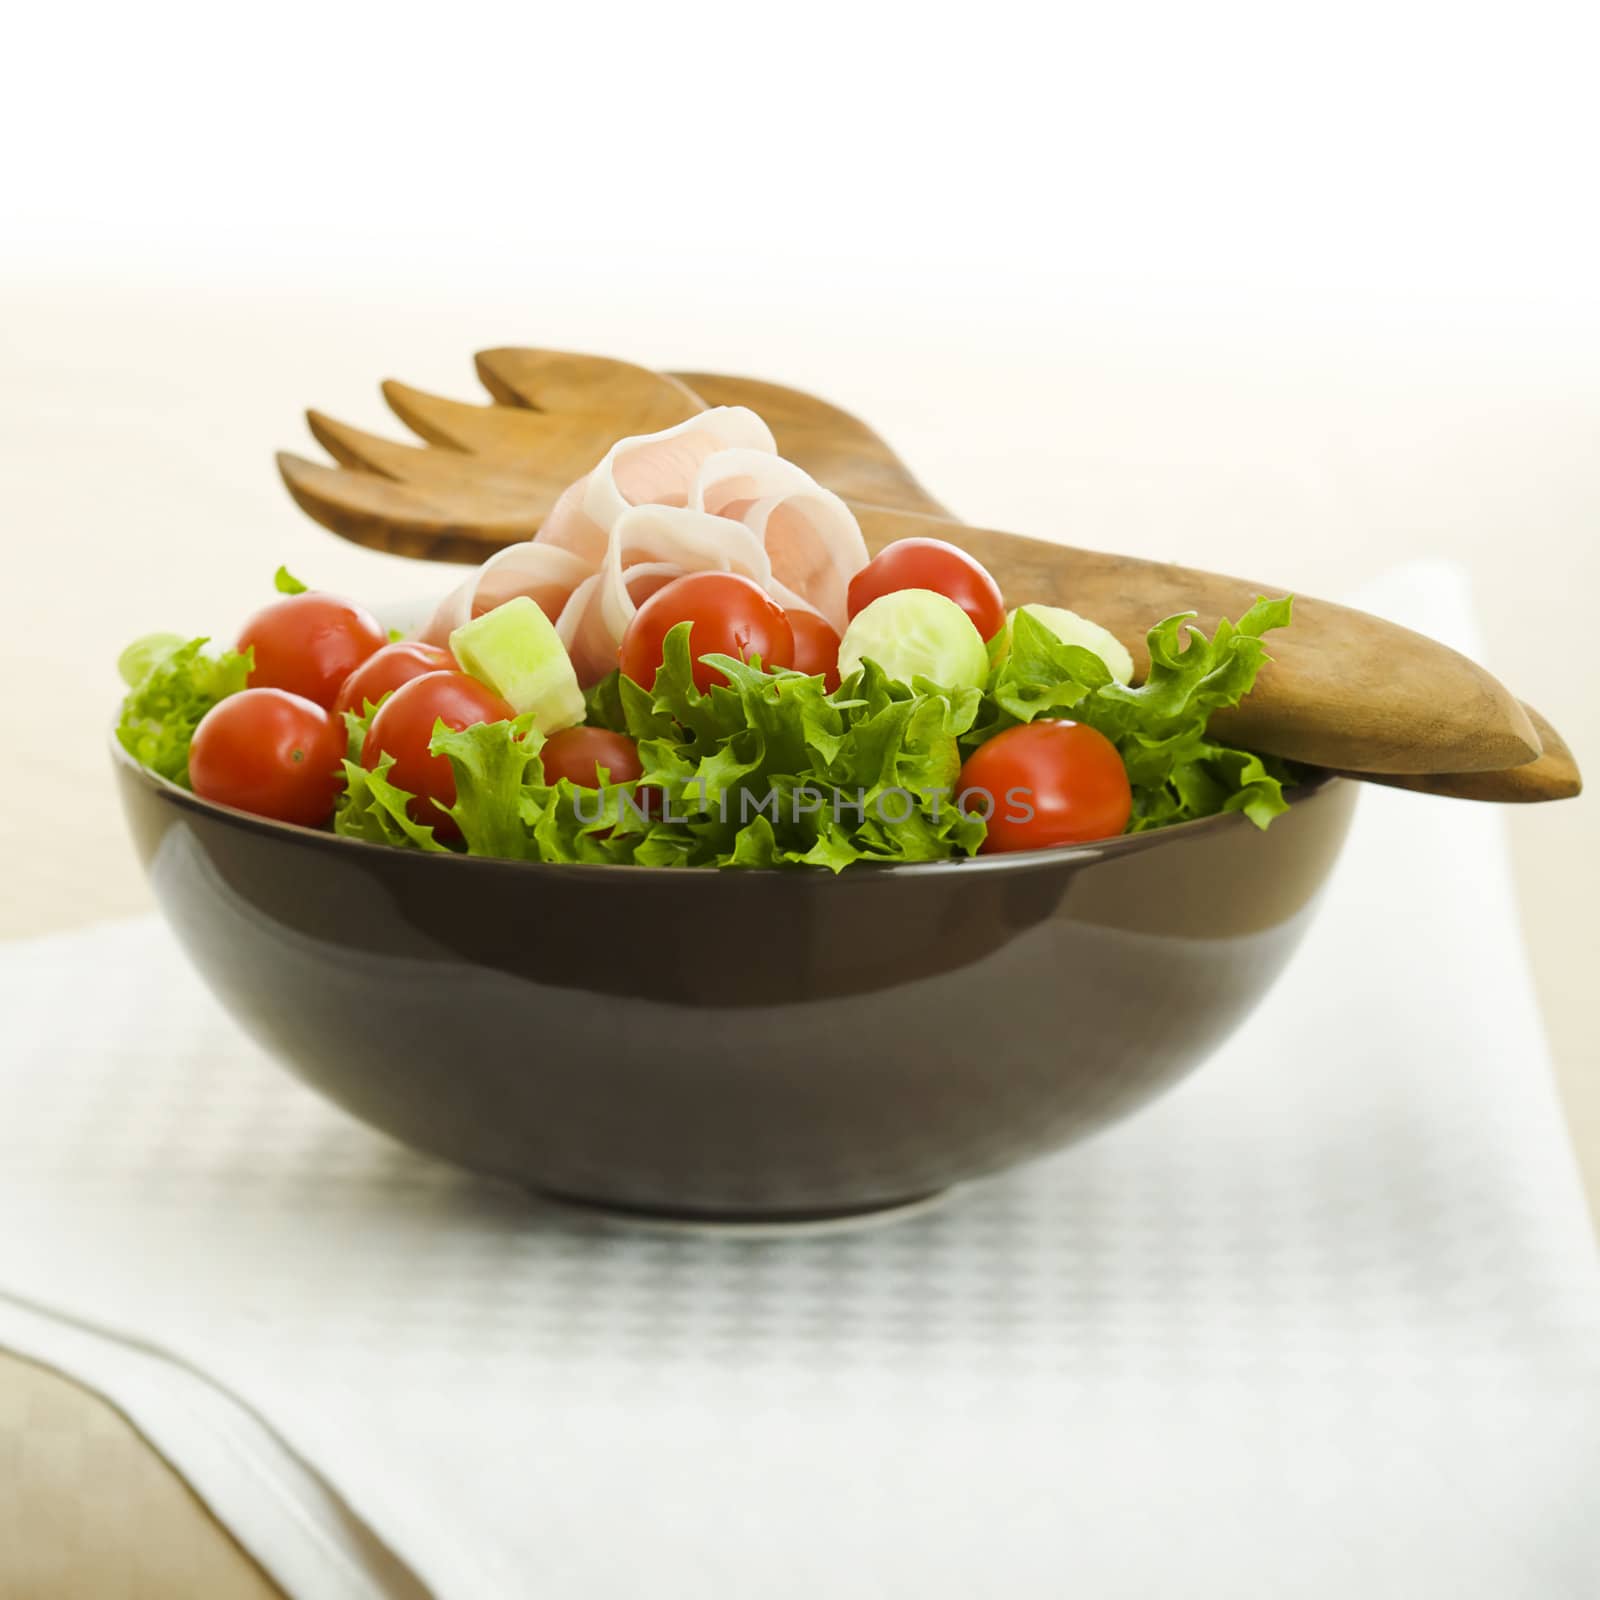 Prosciutto salad with wooden spoon on the table